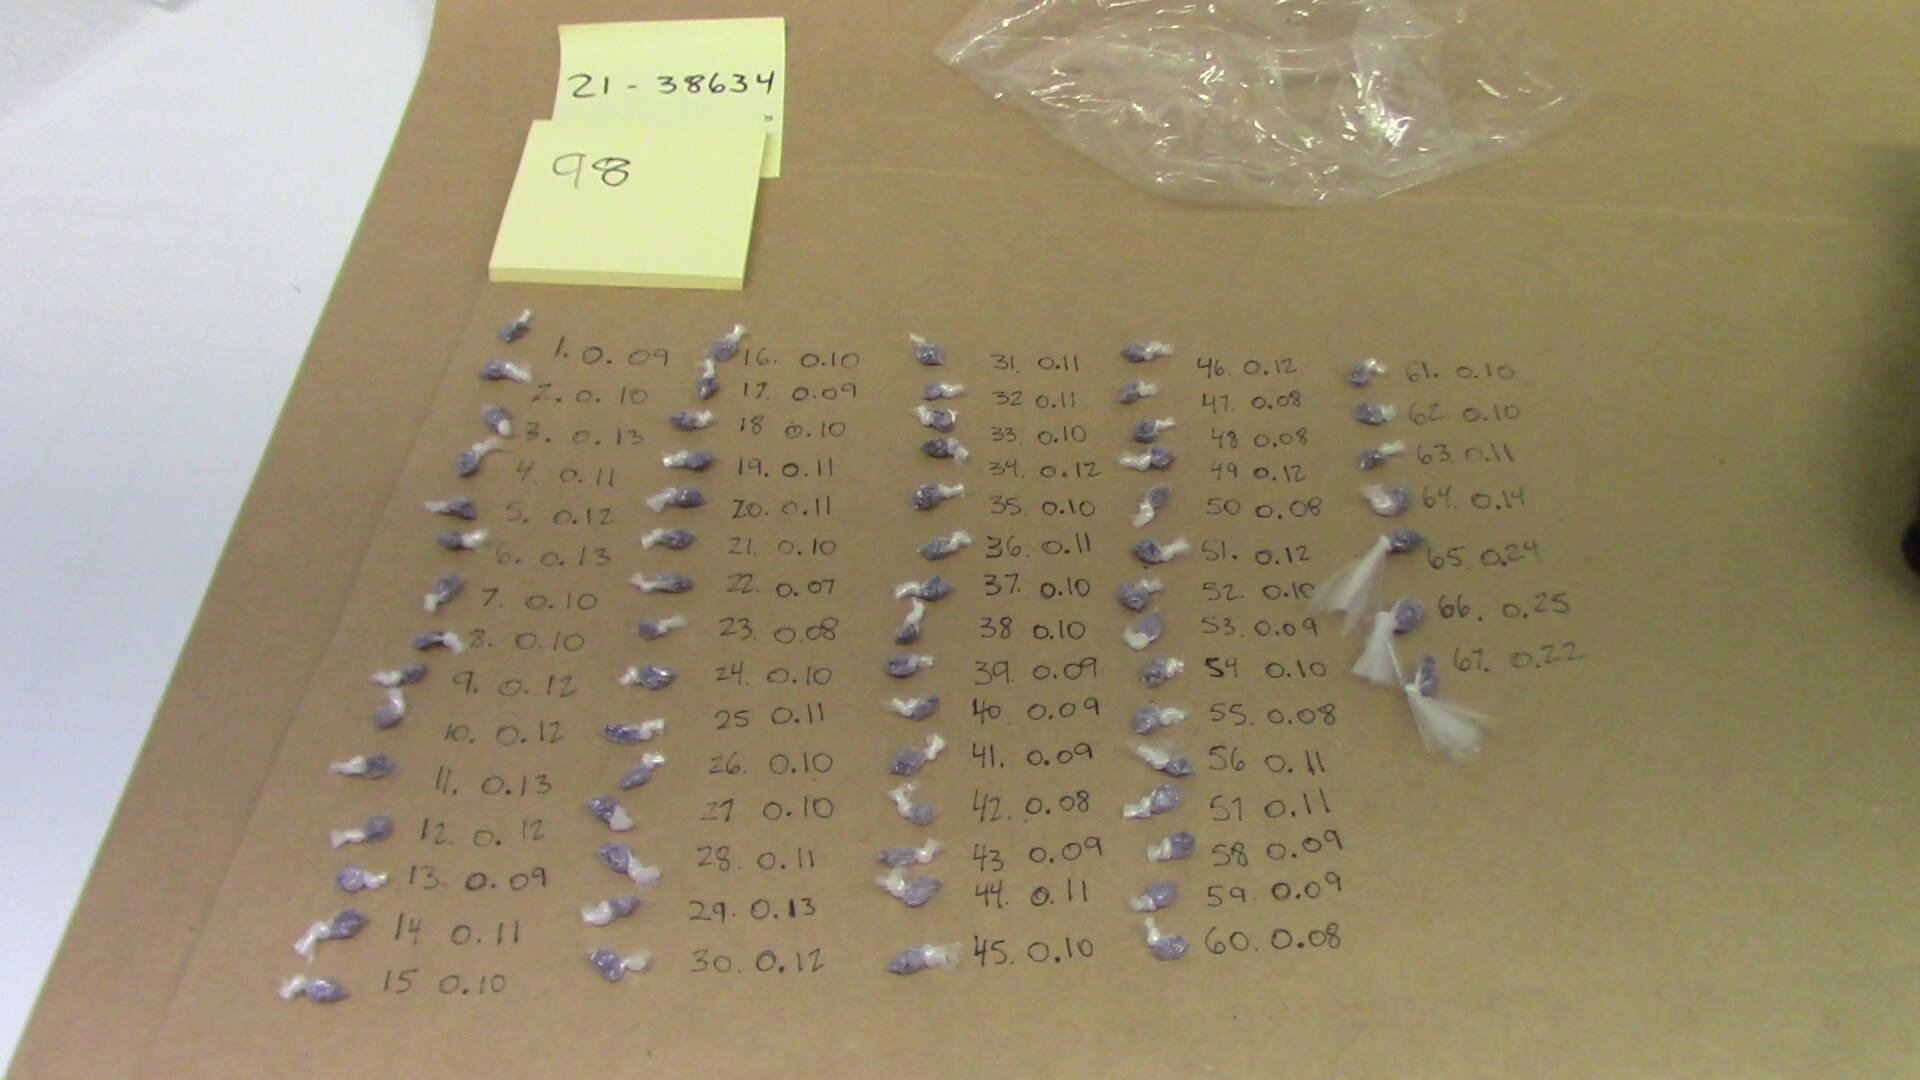 26998249_web1_211104-SUL-RCMP-Whalley-drugs-seized_3